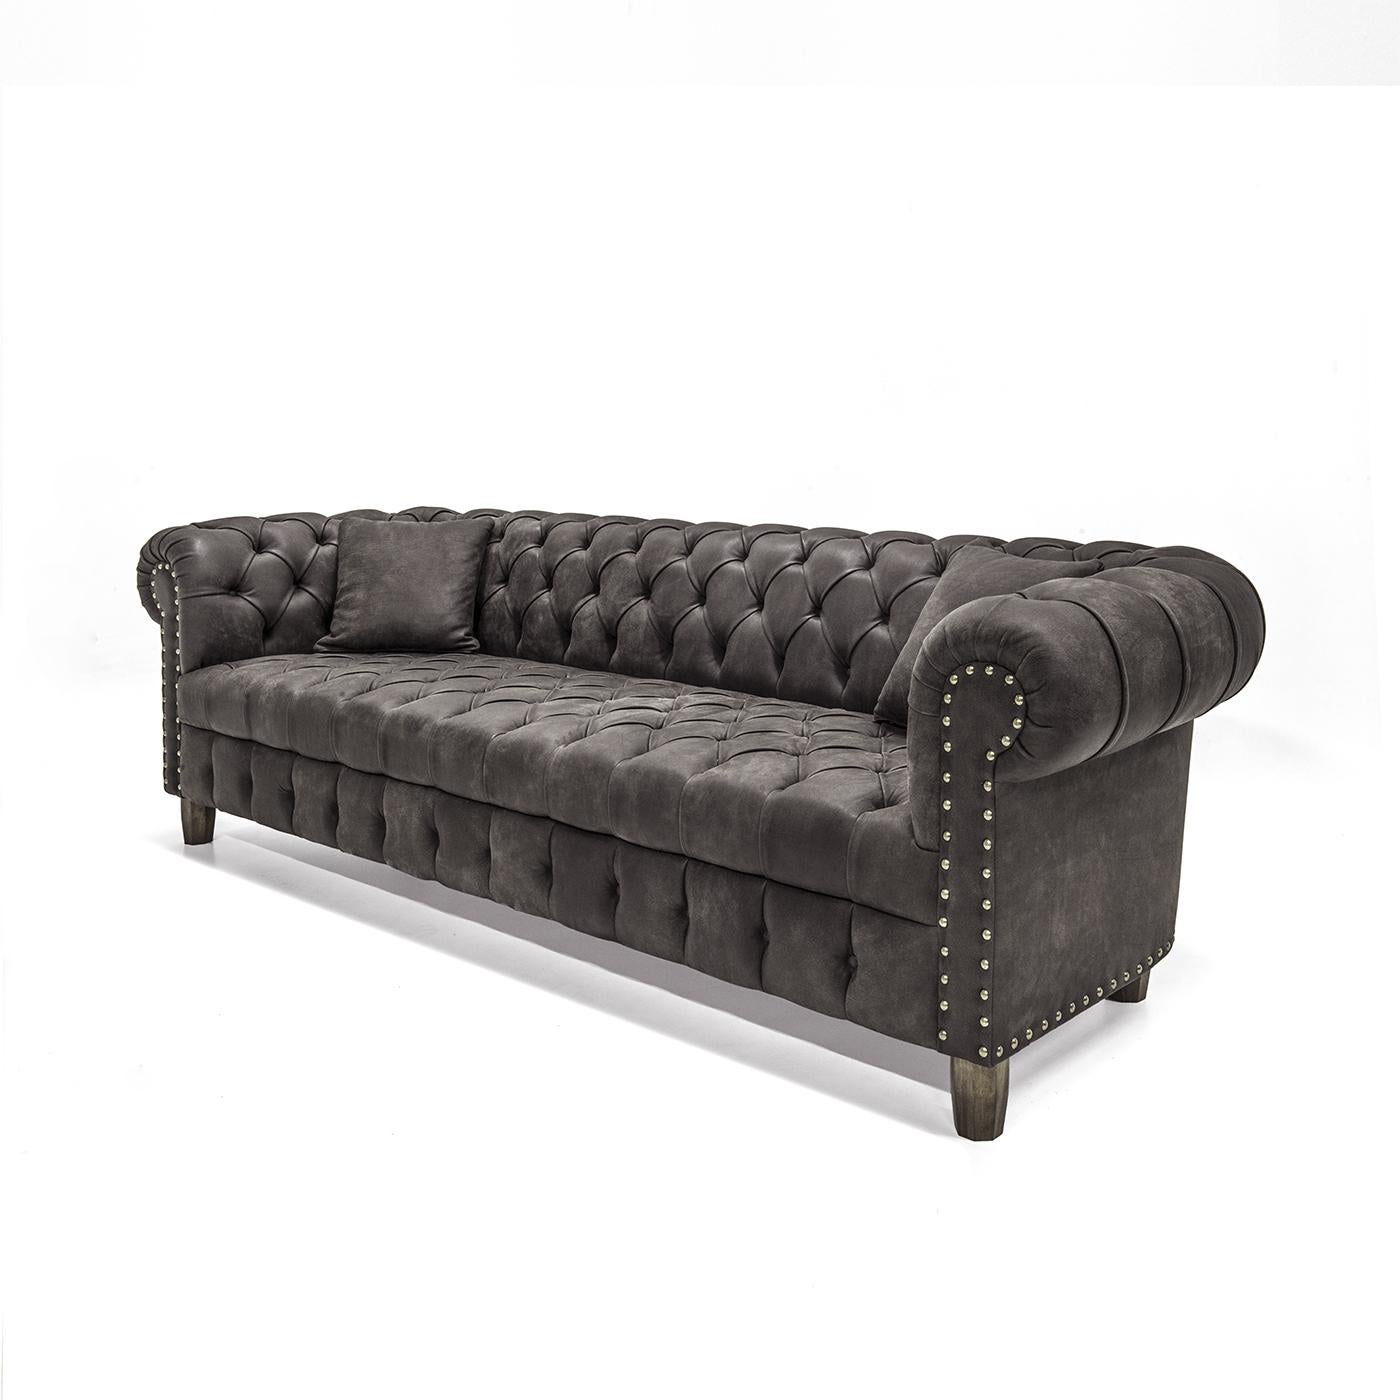 This sofa will make a sophisticated statement in any home and will instantly enhance a classic decor. This piece was crafted by hand with a structure in solid wood and seat padding complete with internal Greek springs. Fine leather upholstery,